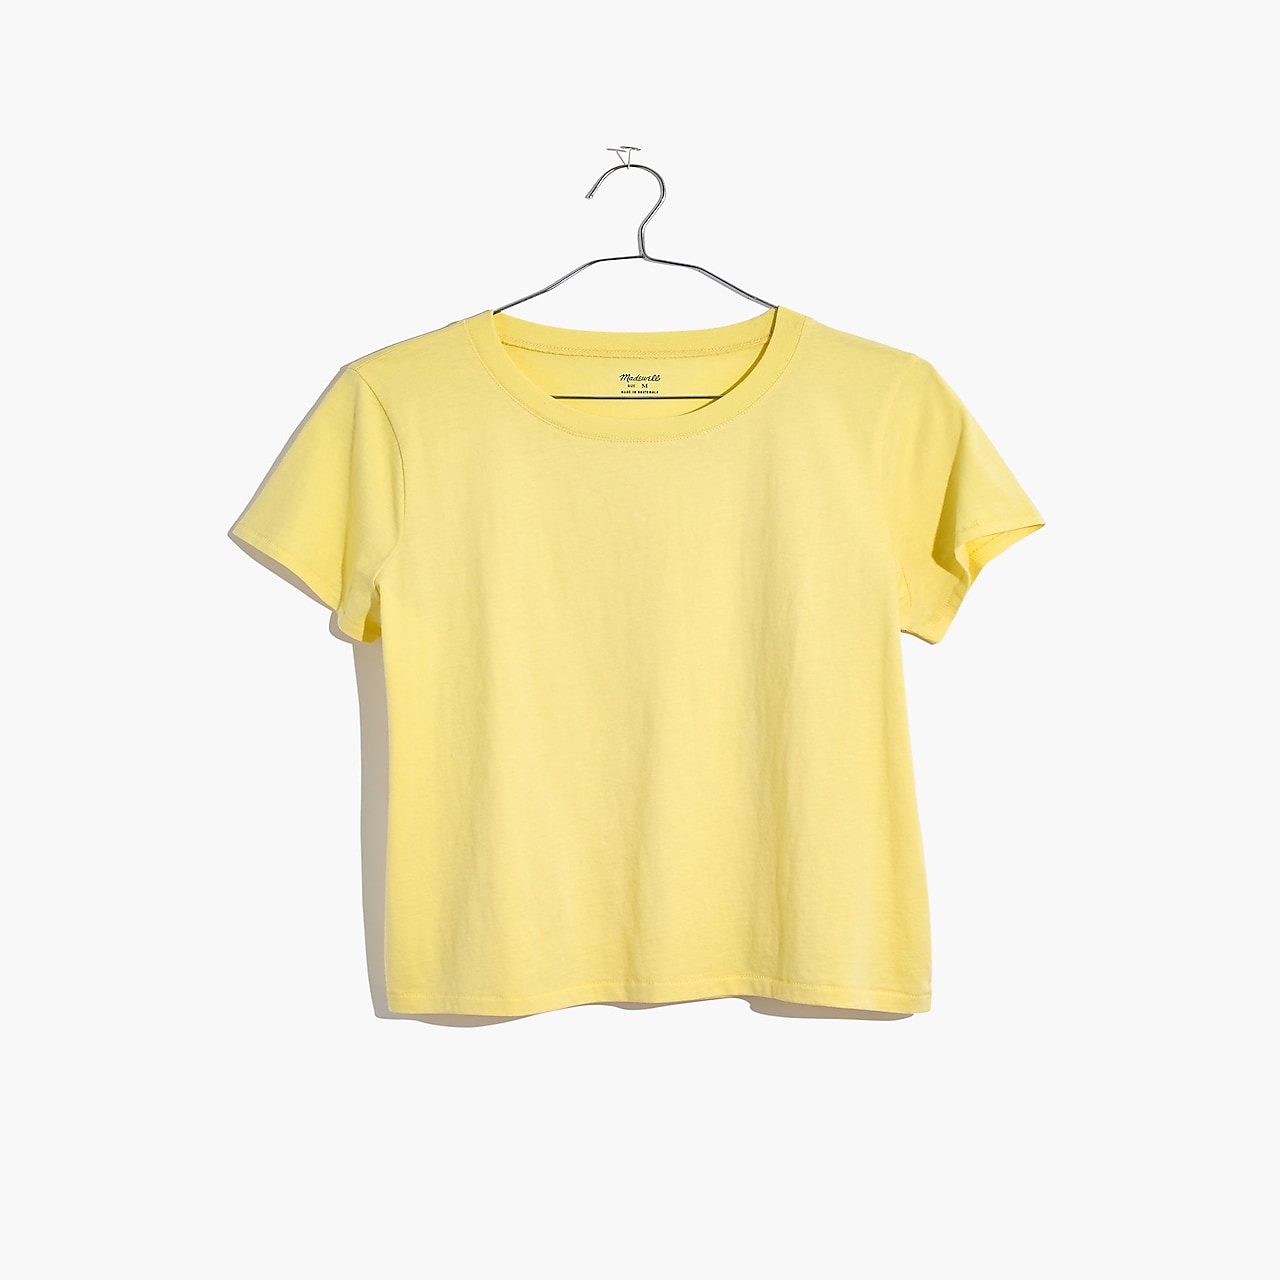 Mw Northside Vintage Tee In Pale Citron